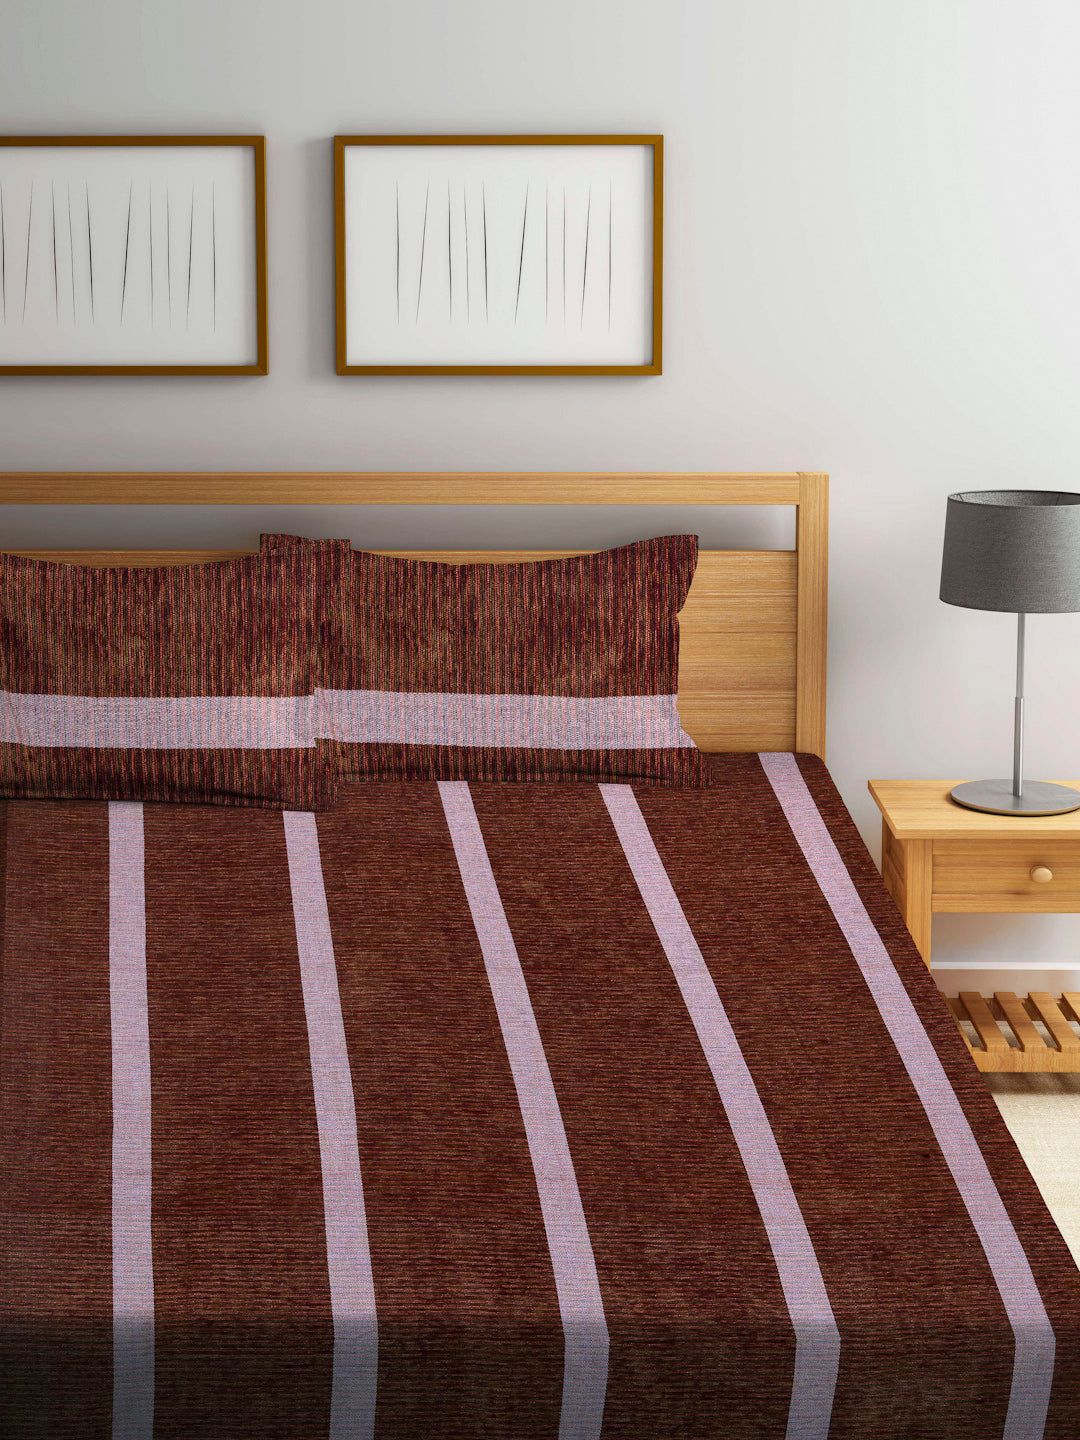 Arrabi Brown Stripes Handwoven Cotton King Size Bedsheet with 2 Pillow Covers (260 X 230 cm)